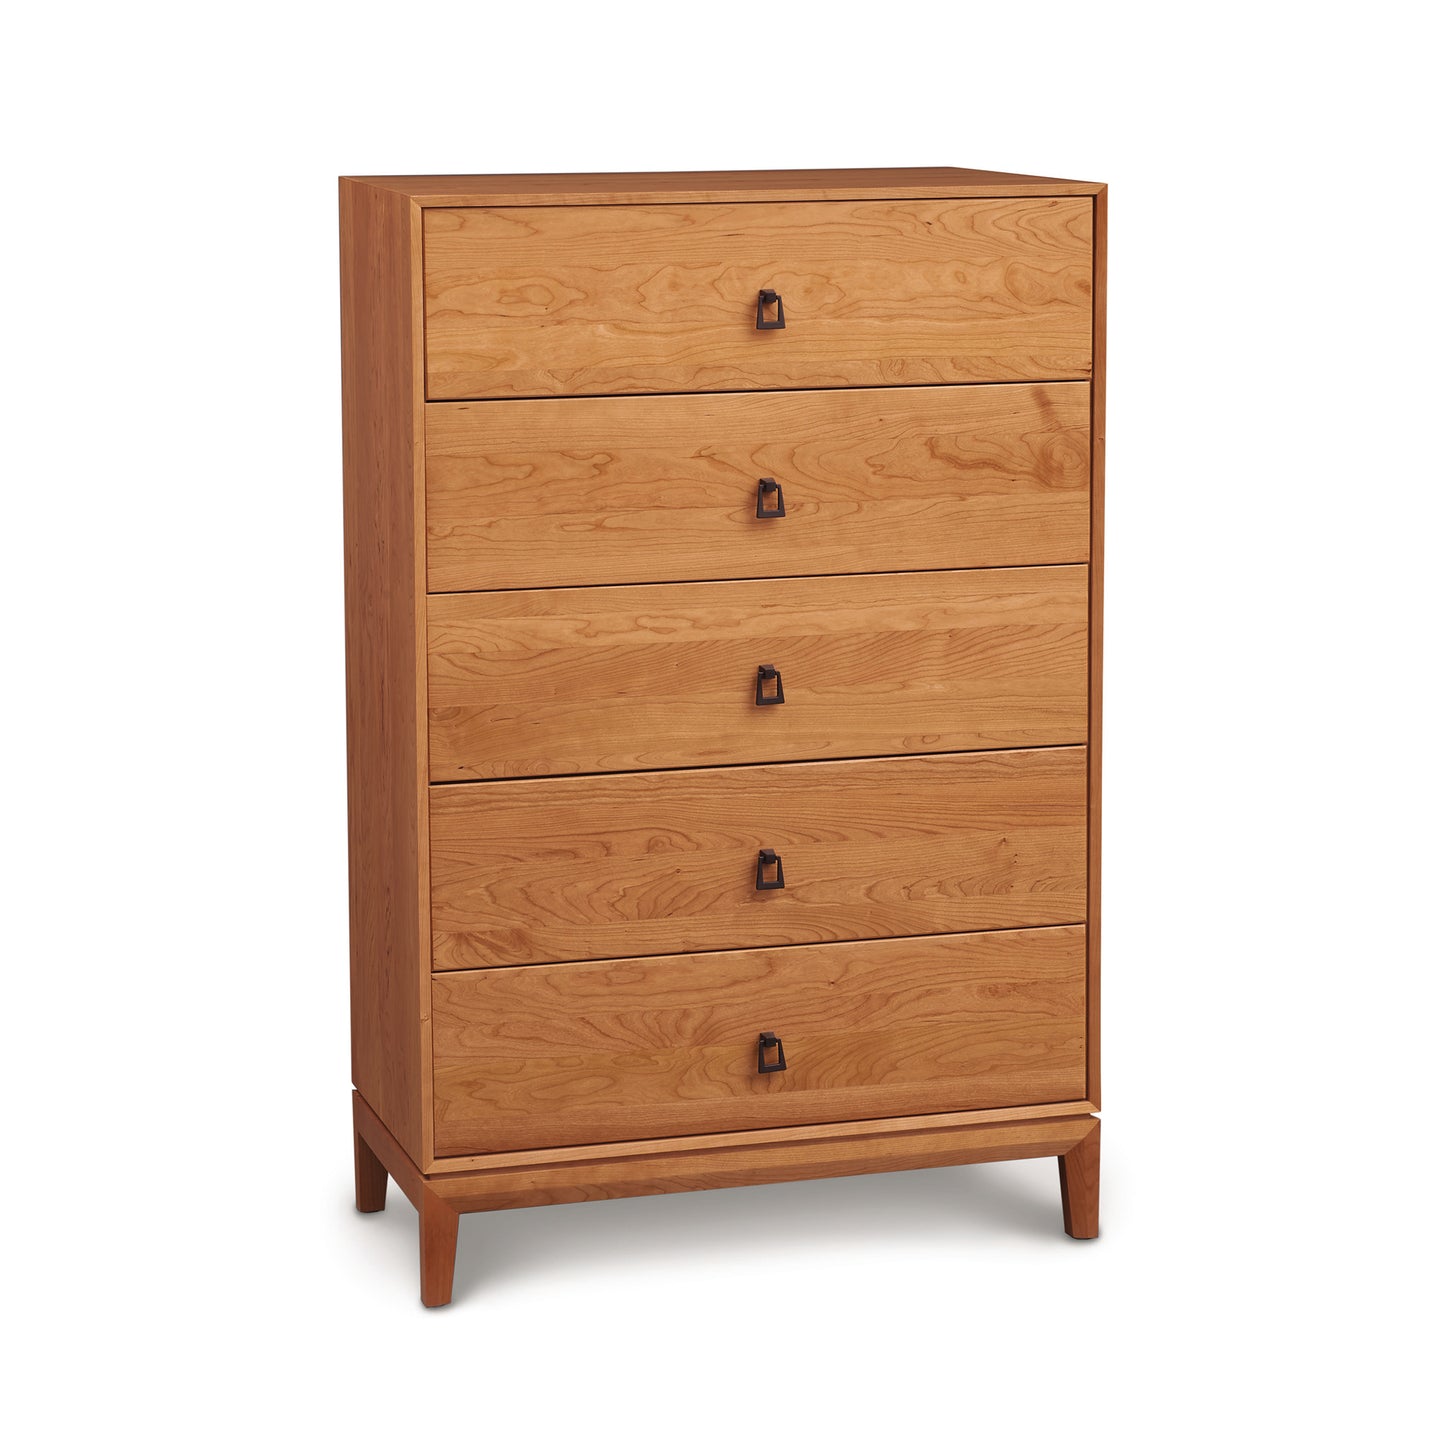 A solid natural wood Copeland Furniture Mansfield 5-Drawer Wide Chest isolated on a white background.